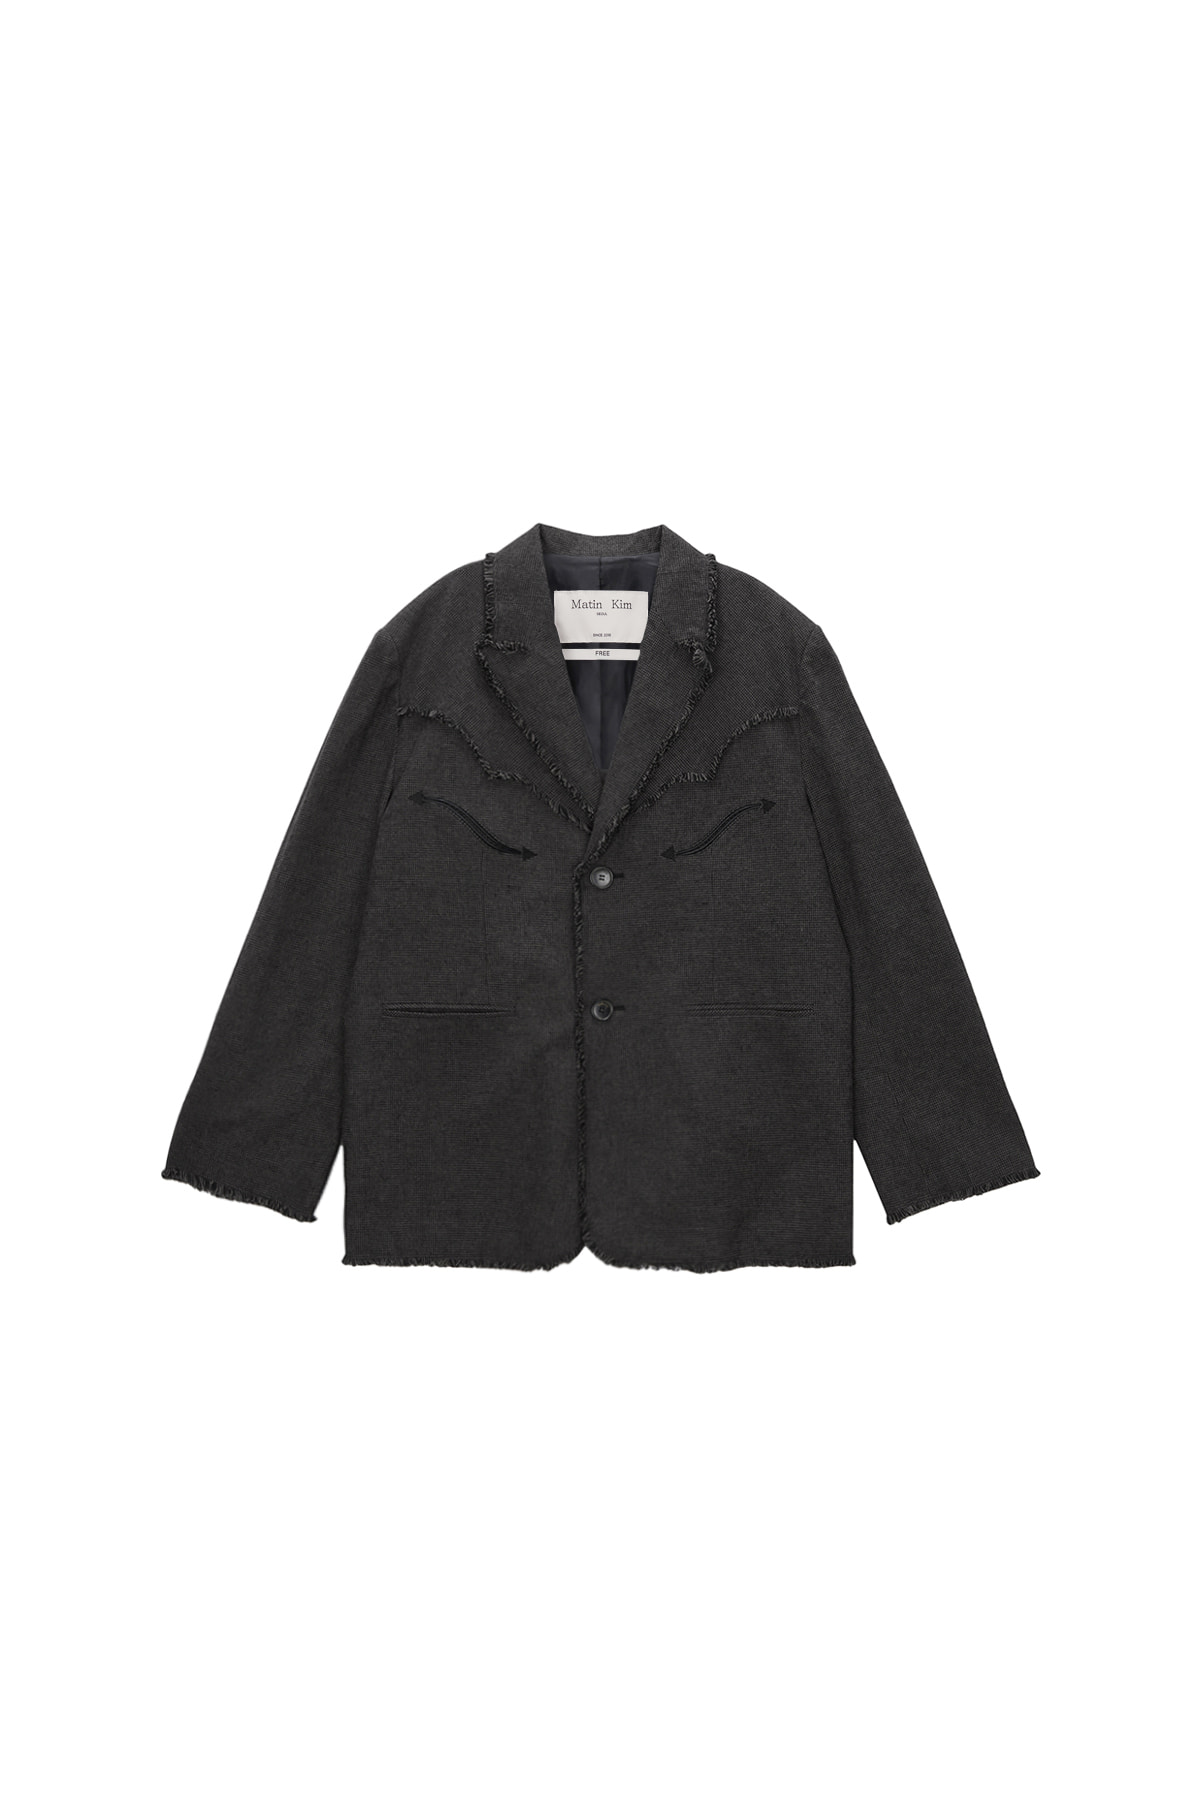 RAW CUT CHECK BLAZER FOR MEN IN CHARCOAL